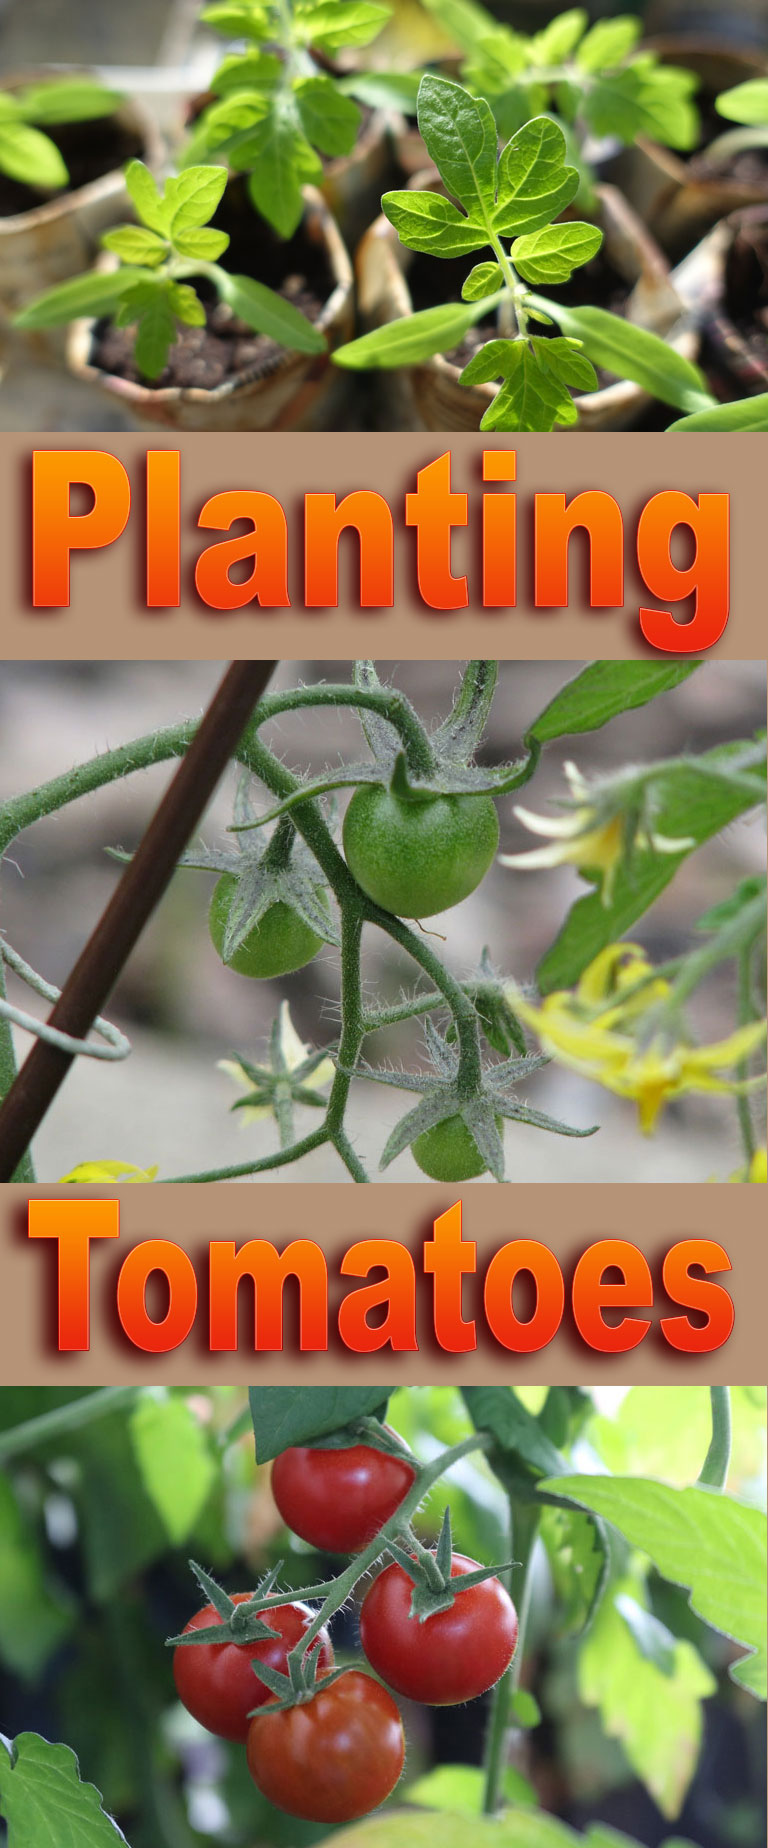 How to Planting Tomatoes